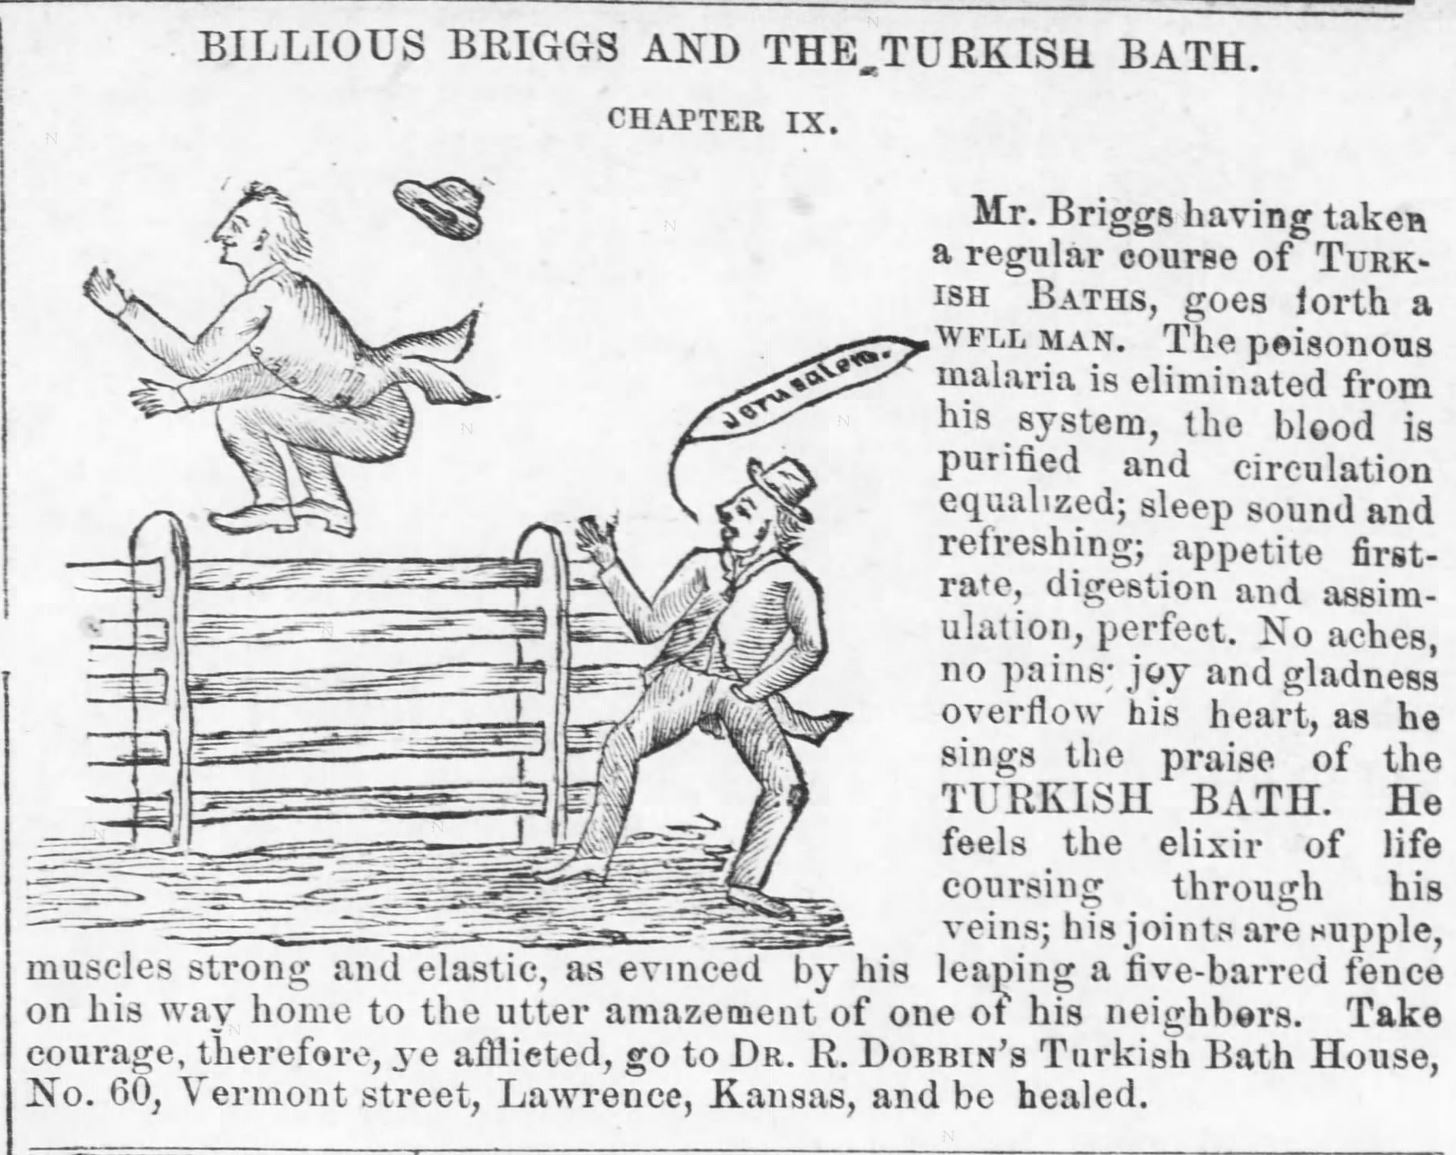 Kristin Holt | Old west Bath House. Illustrated Ad for Turkish Bath from The Kansas Daily Tribune of Lawrence, Kansas, July 30, 1881. "having taken a regular course of Turkish Baths, goes forth a well man. The poisonous malaria is eliminated from his ysstem, the blood is purified, and circulation equalized; sleep sound and refreshing; appetite first-rate, digestion and assimulation [sic] perfect. No aches, no pains; joy and gladdness overflow his heart, as he sings the praise of the Turkish Bath. He feels the elixir of life coursing through his veins; his joints are supple, muscles strong and elastic, as evinced by his leaping a five-barred fence on his way home to the utter amazement of one of his neighbors. Take courage, therefore, ye afflicted, go to Dr. R. Dobbin's Turkish Bath House, No. 60, Vermont street, Lawrence, Kansas, and be healed."